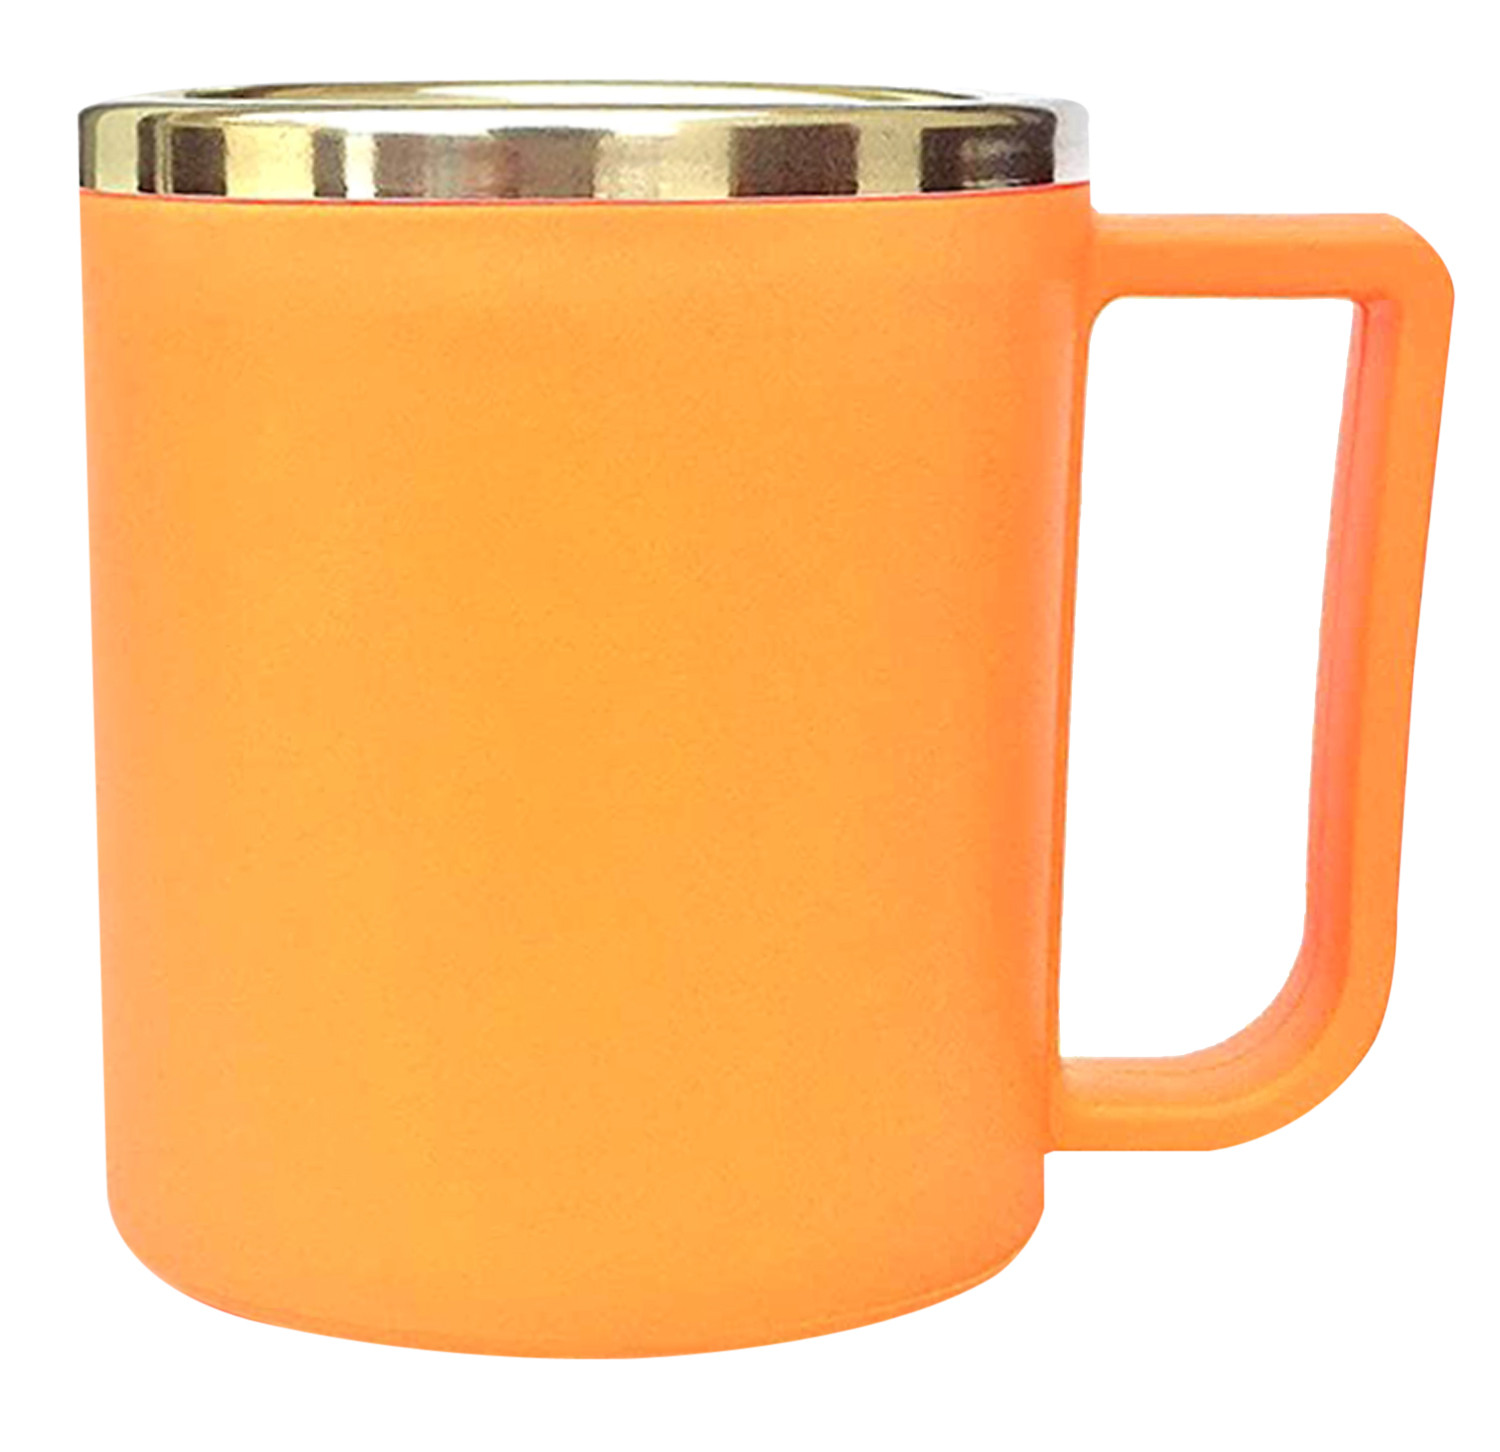 Kuber Industries Medium Size Plastic Steel Cups for Coffee Tea Cocoa, Camping Mugs with Handle, Portable & Easy Clean,(Green & Orange)